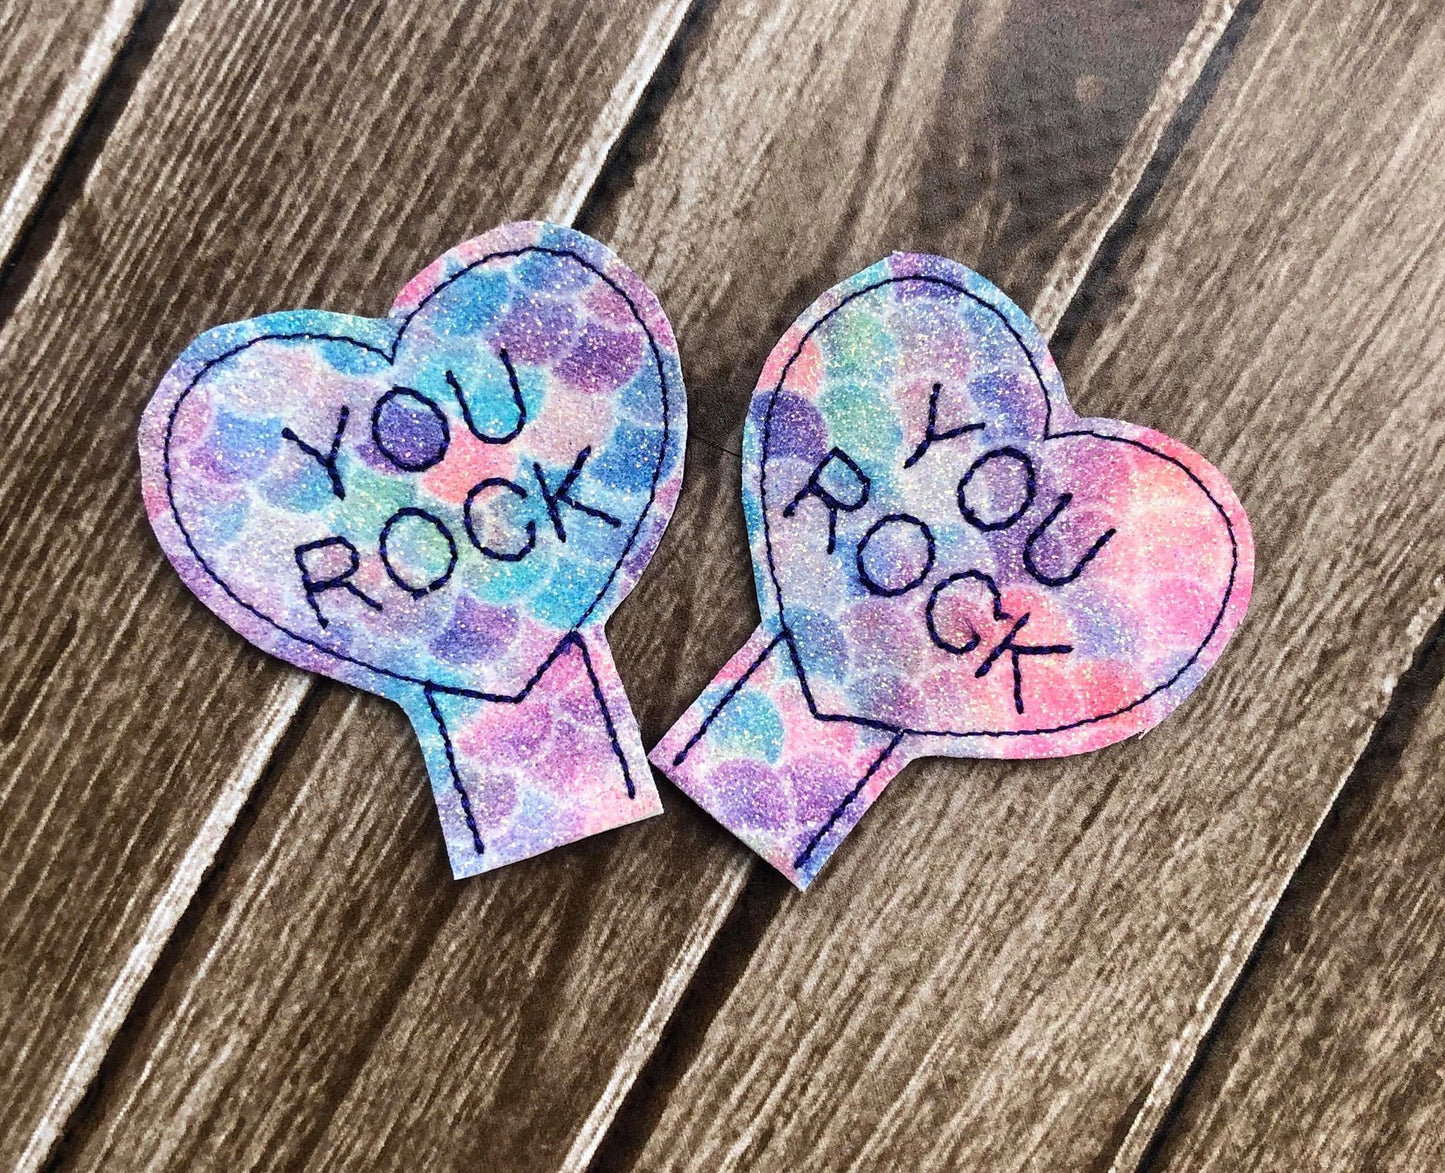 You Rock Heart Pencil Toppers - DIGITAL Embroidery DESIGN